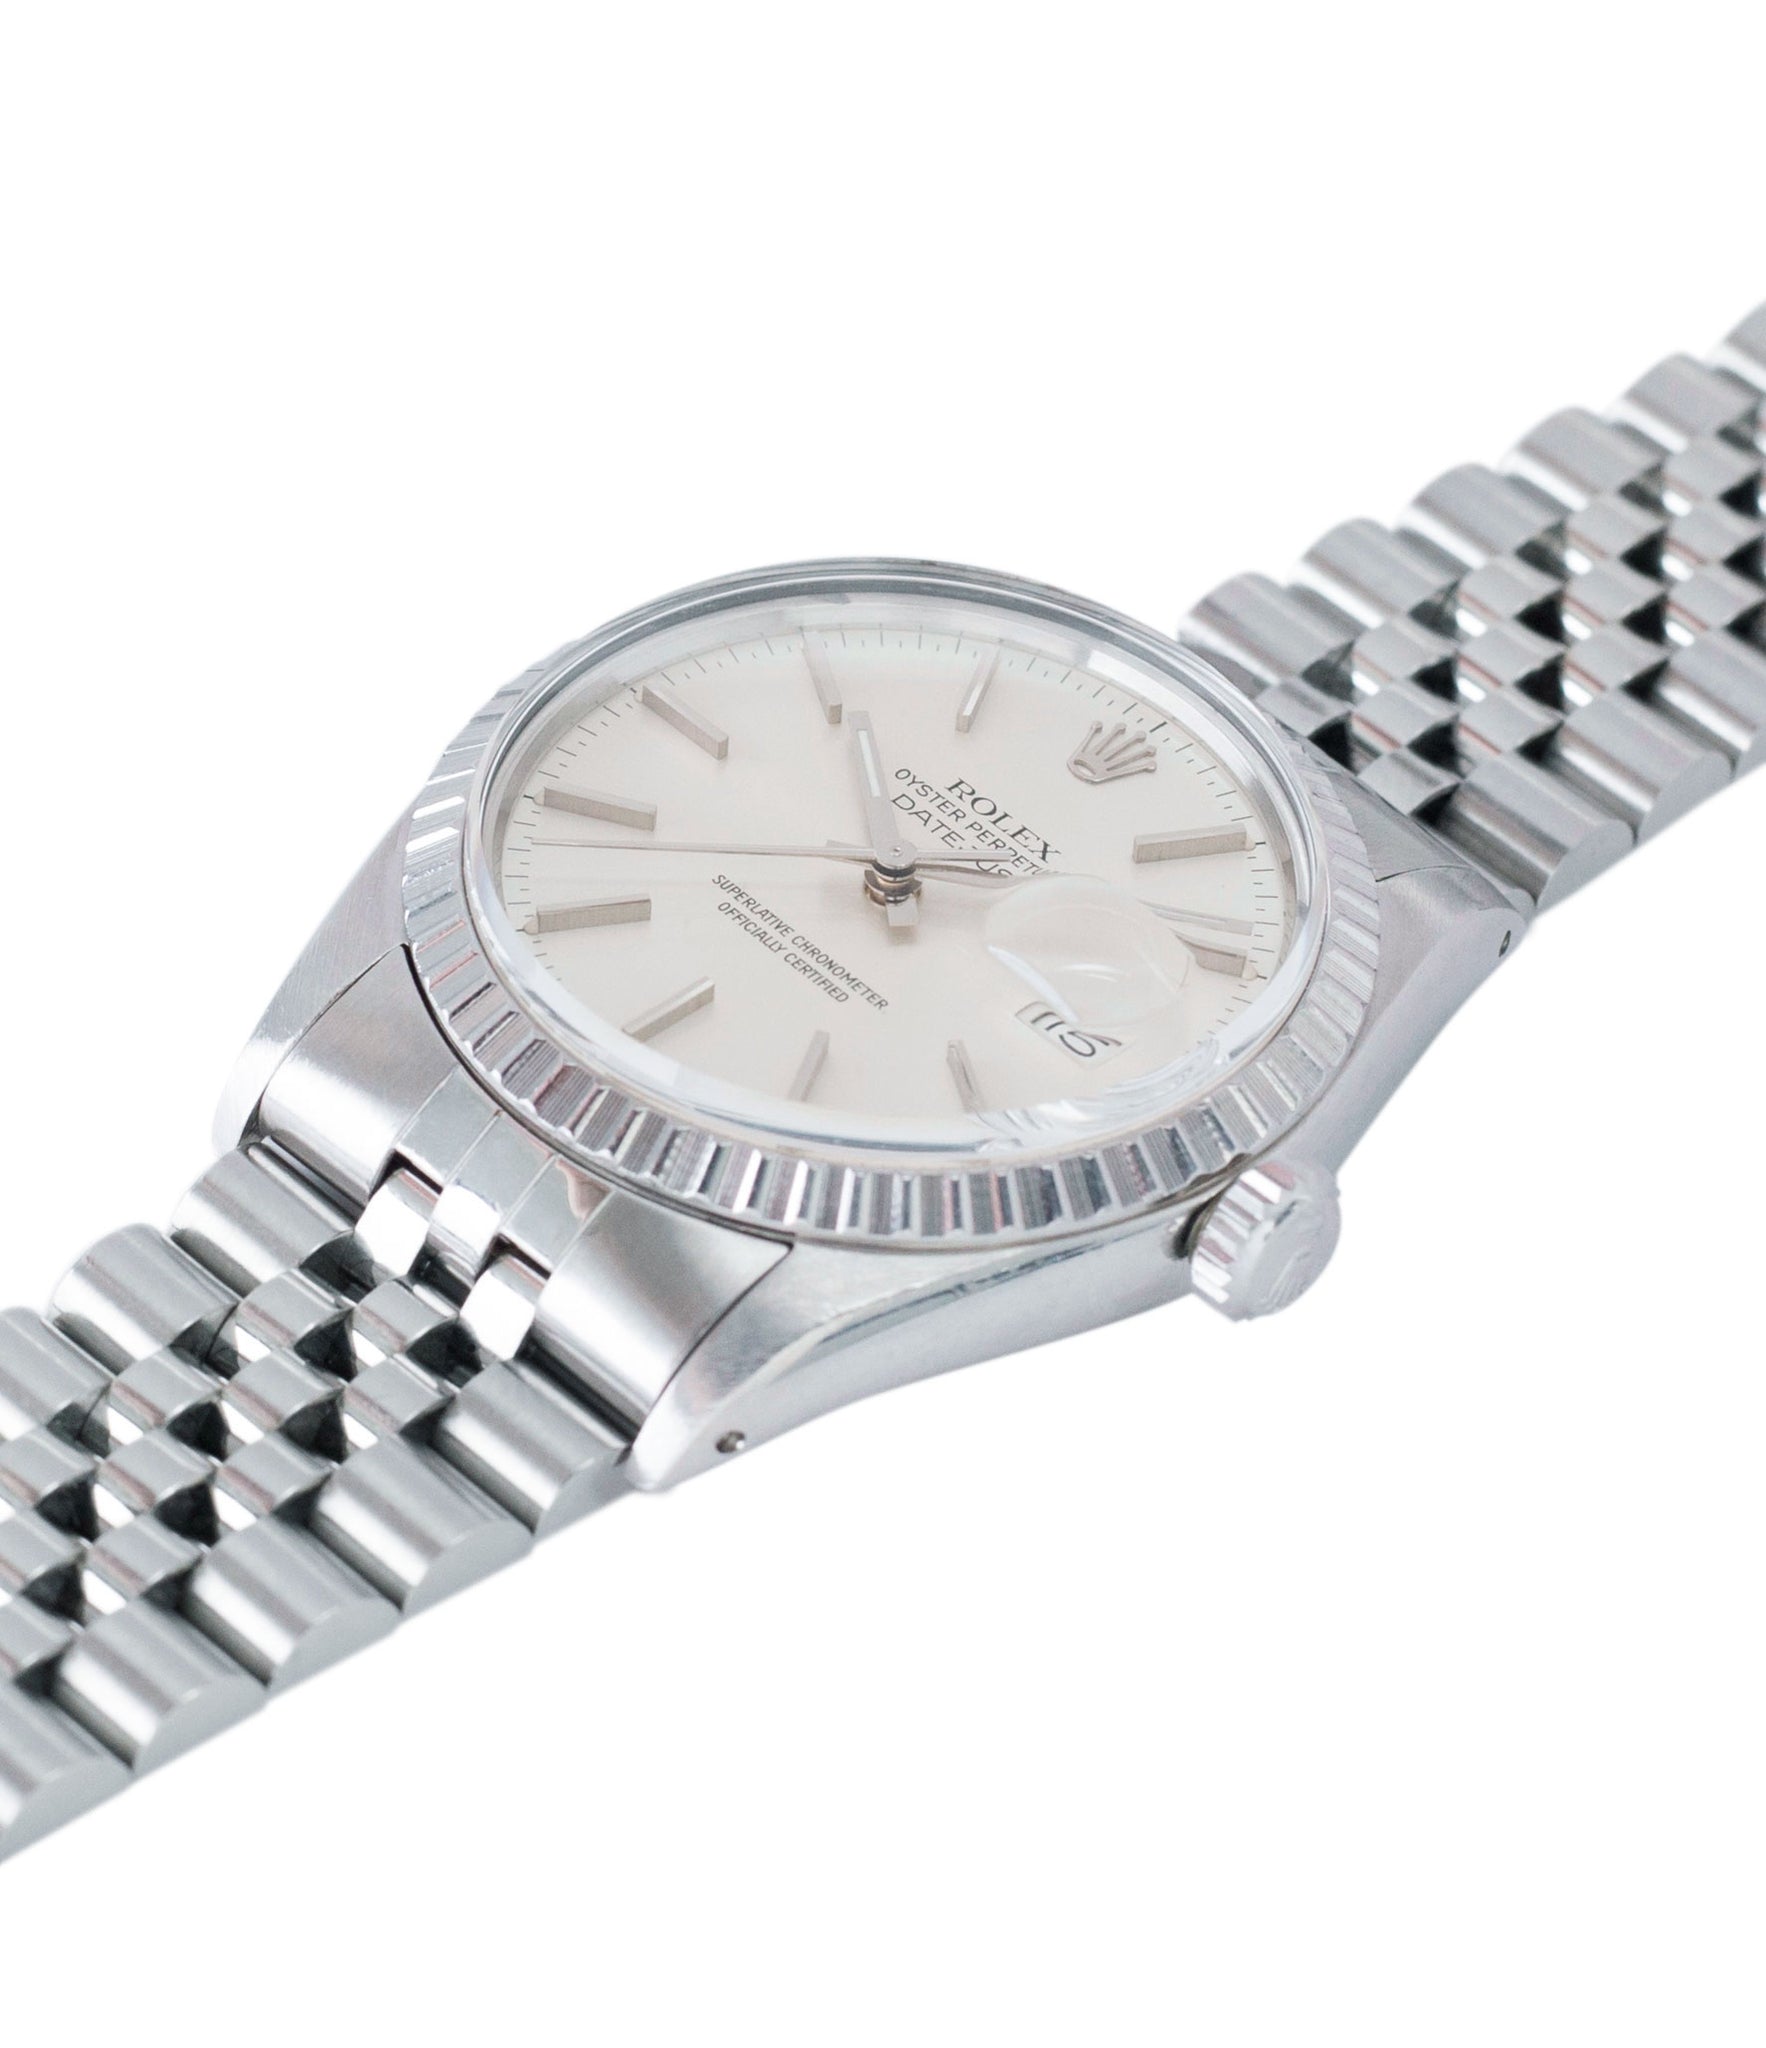 shop vintage full set Rolex Oyster Perpetual Datejust 16030 steel automatic silver dial watch Jubilee bracelet for sale online at A Collected Man London UK vintage watch specialist